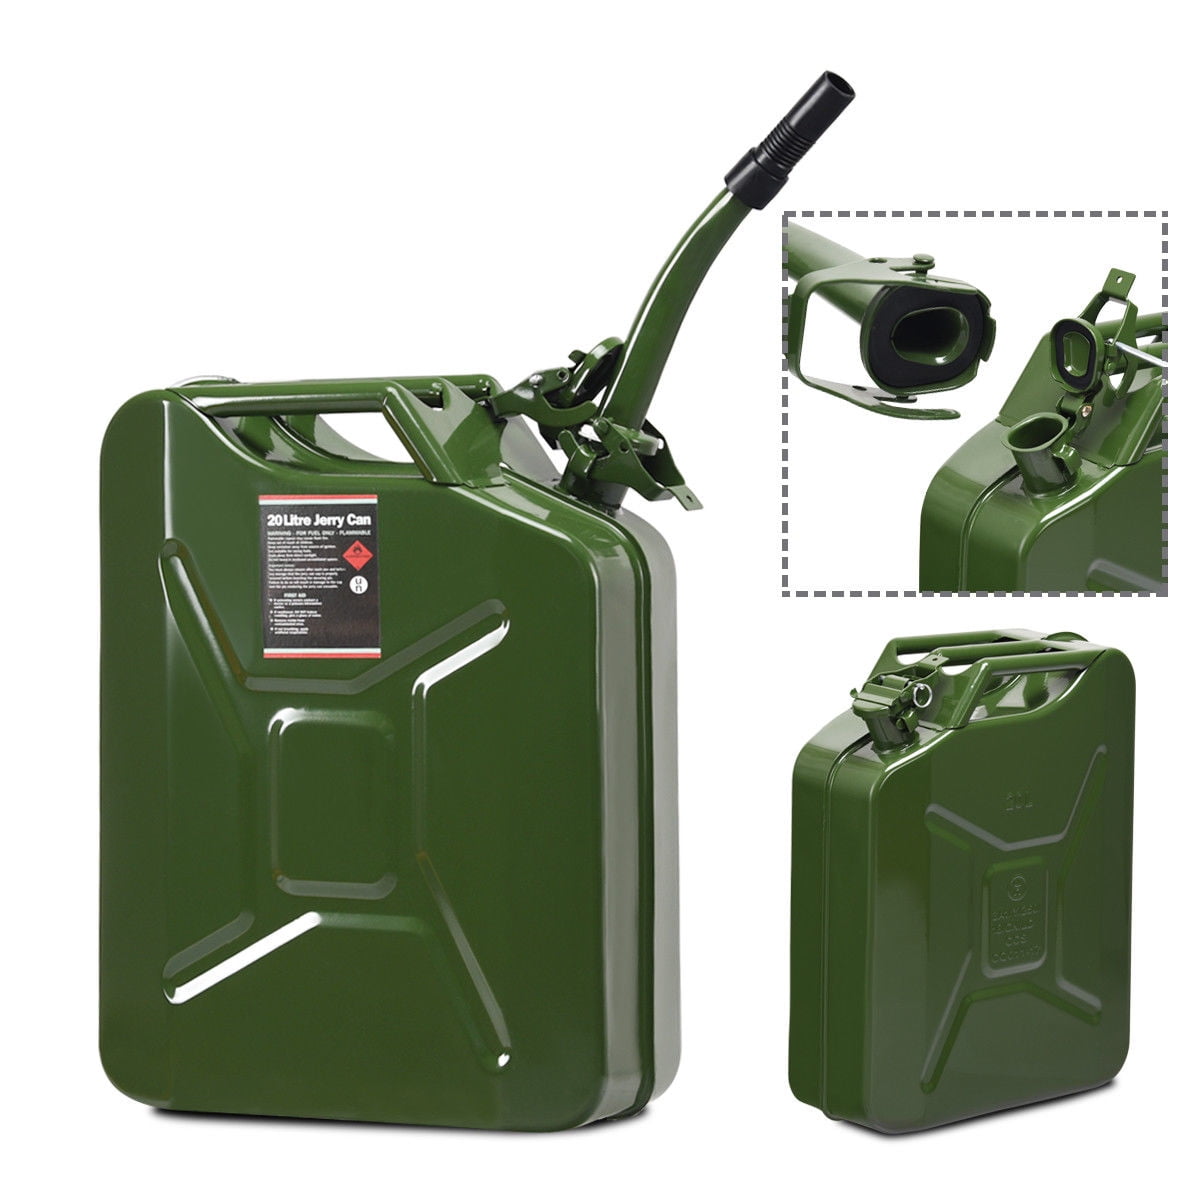 Lot 8~ Jerry Can Green 20L 5 Gallon Backup Steel Tank Fuel Gasoline Military 